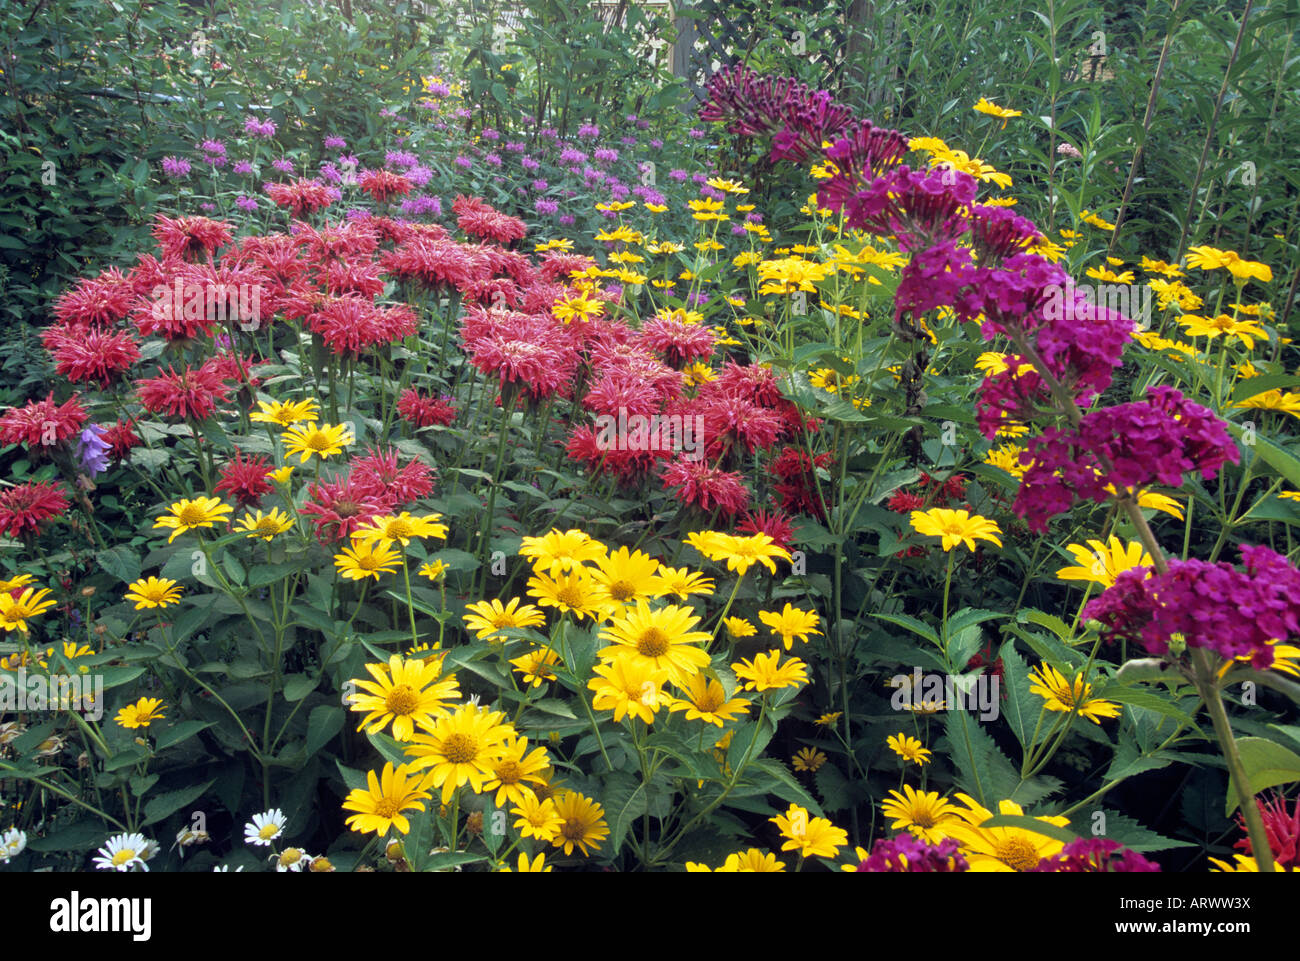 MINNESOTA GARDEN PLANTED TO ATTRACT BUTTERFLIES WITH OXEYE DAISIES, MONARDA BEE BALM AND BUTTERFLY BUSH. SUMMER. Stock Photo